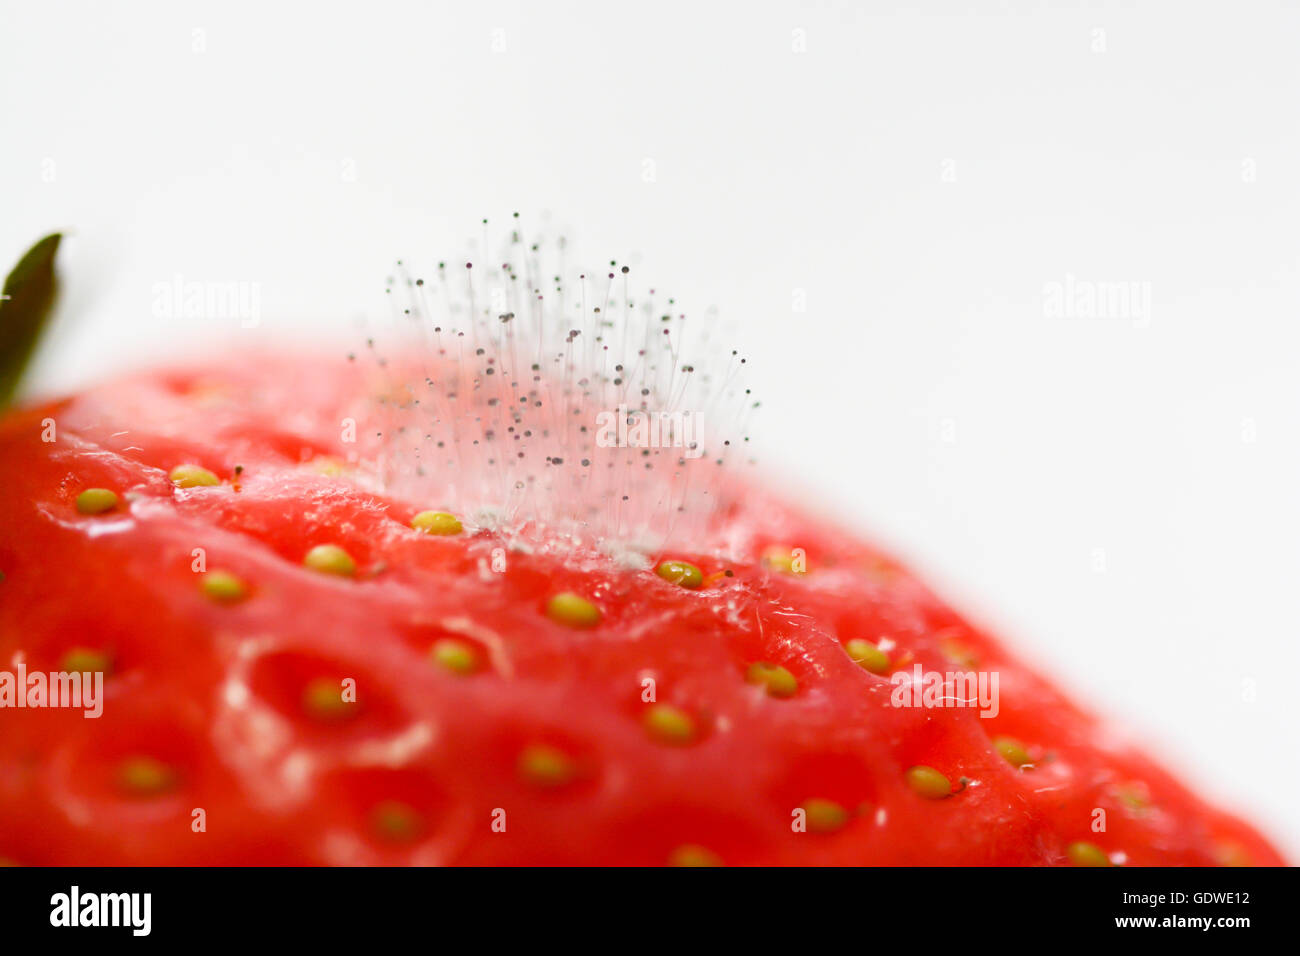 Strawberry with mold stock photo. Image of snack, mildew - 223374096